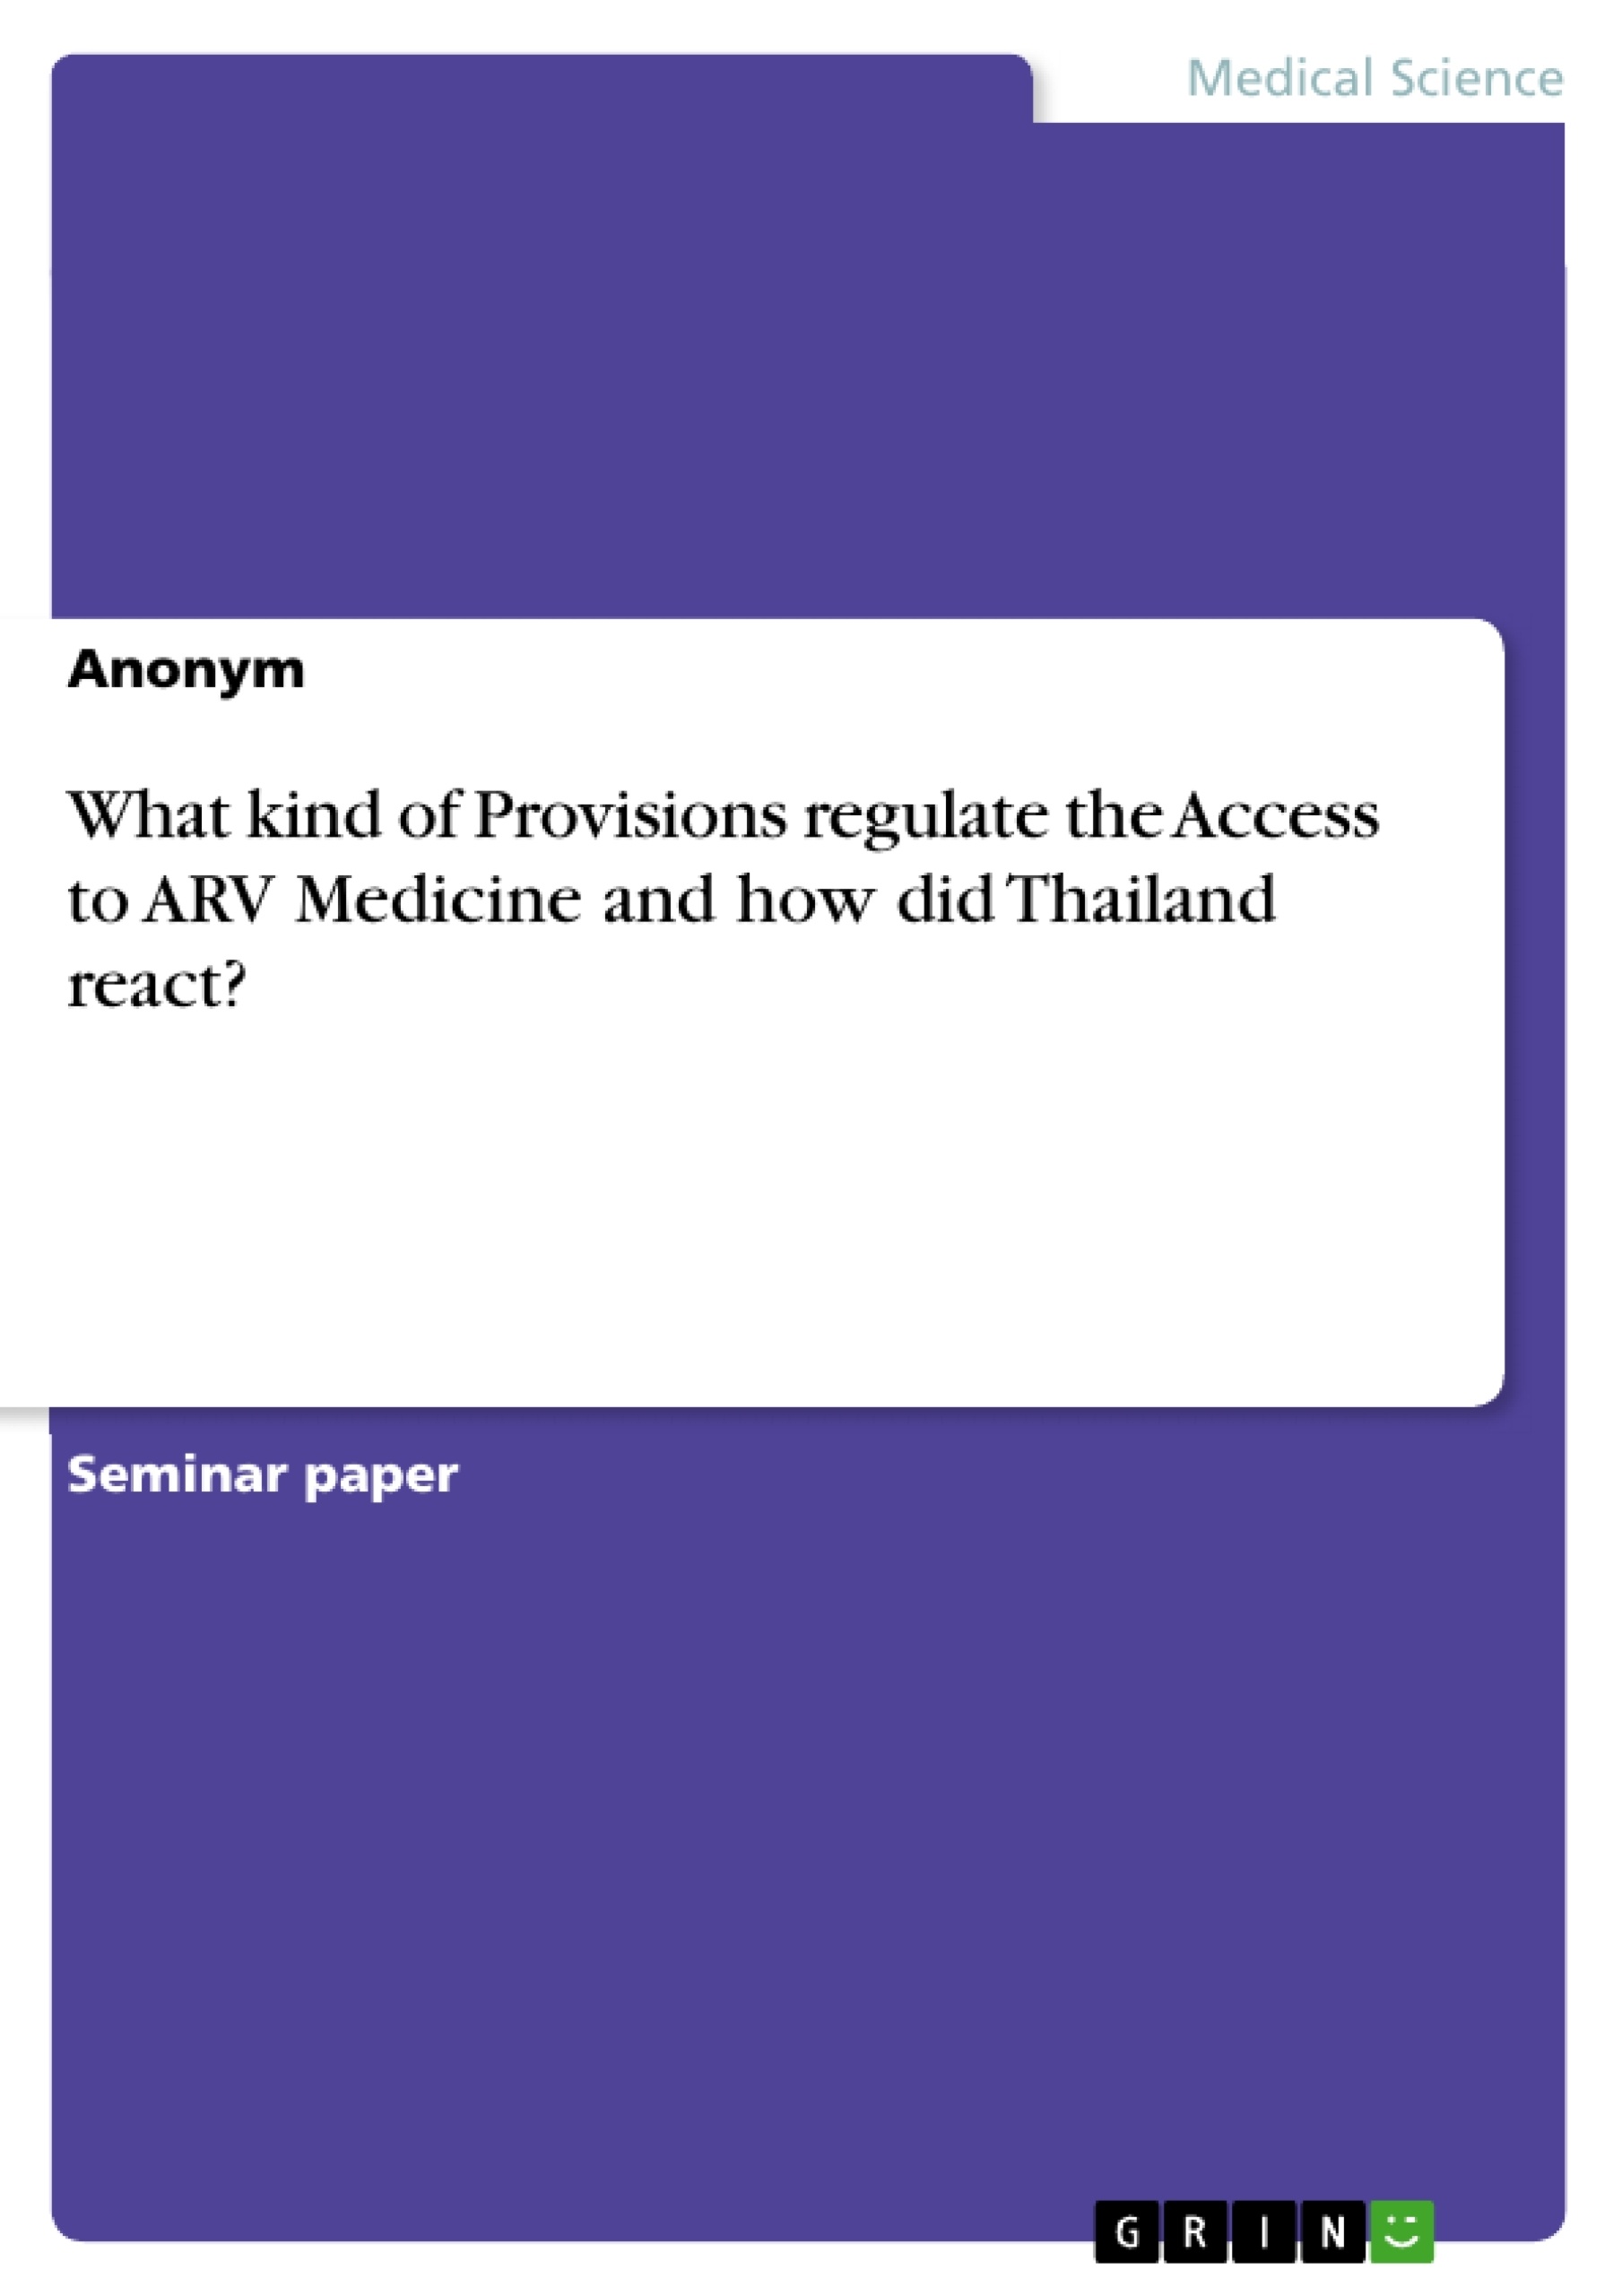 Titre: What kind of Provisions regulate the Access to ARV Medicine and how did Thailand react?